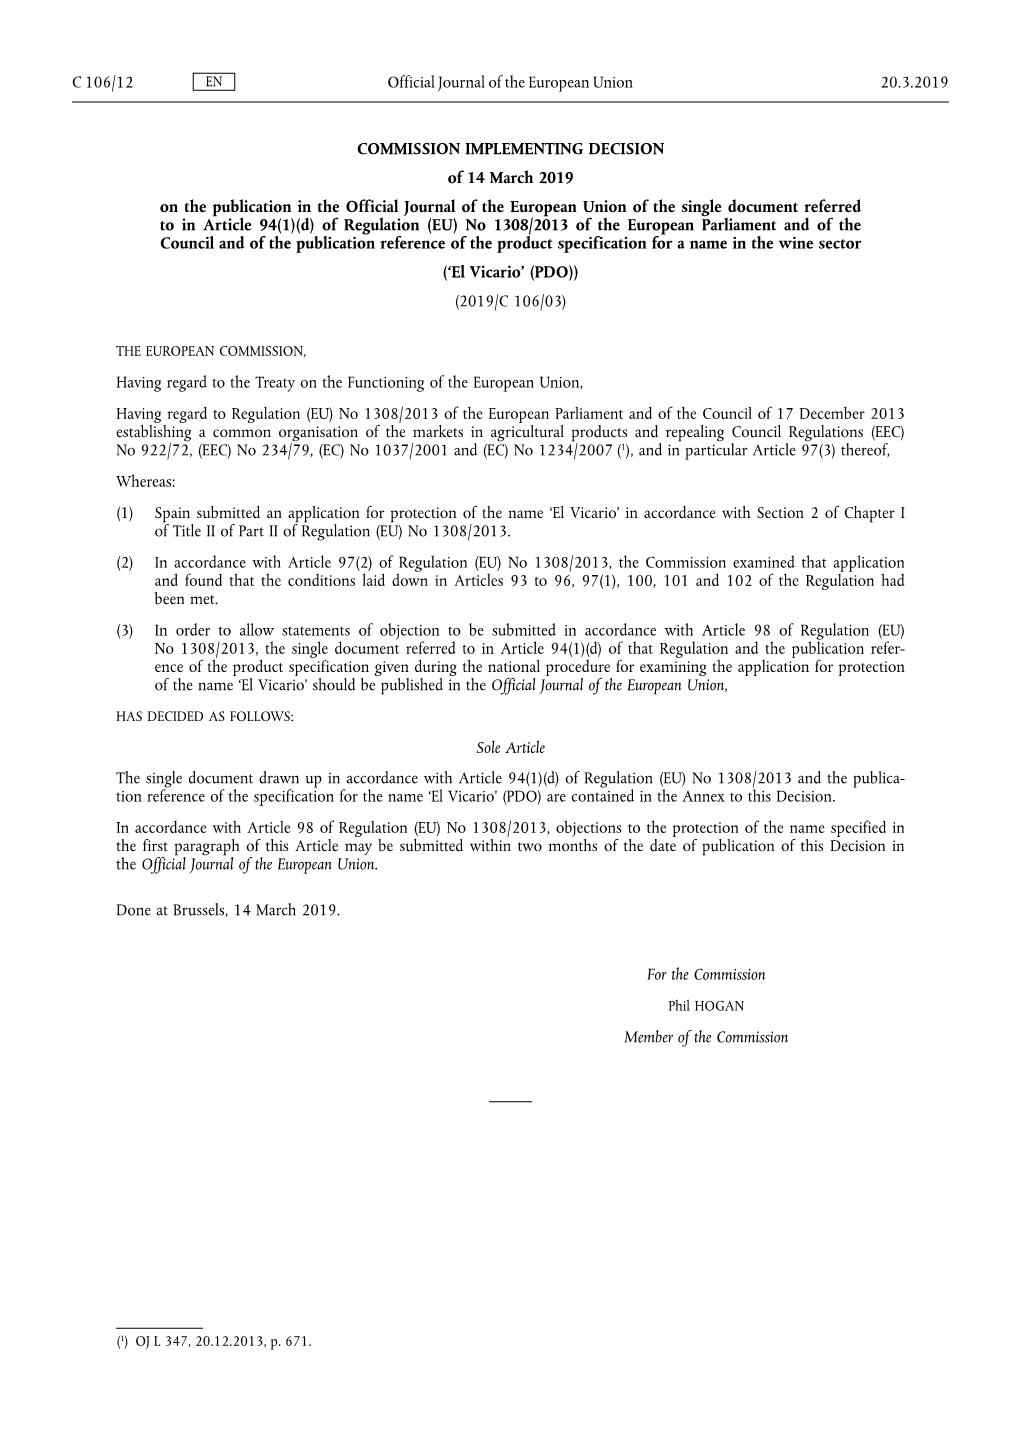 Commission Implementing Decision of 14 March 2019 on the Publication